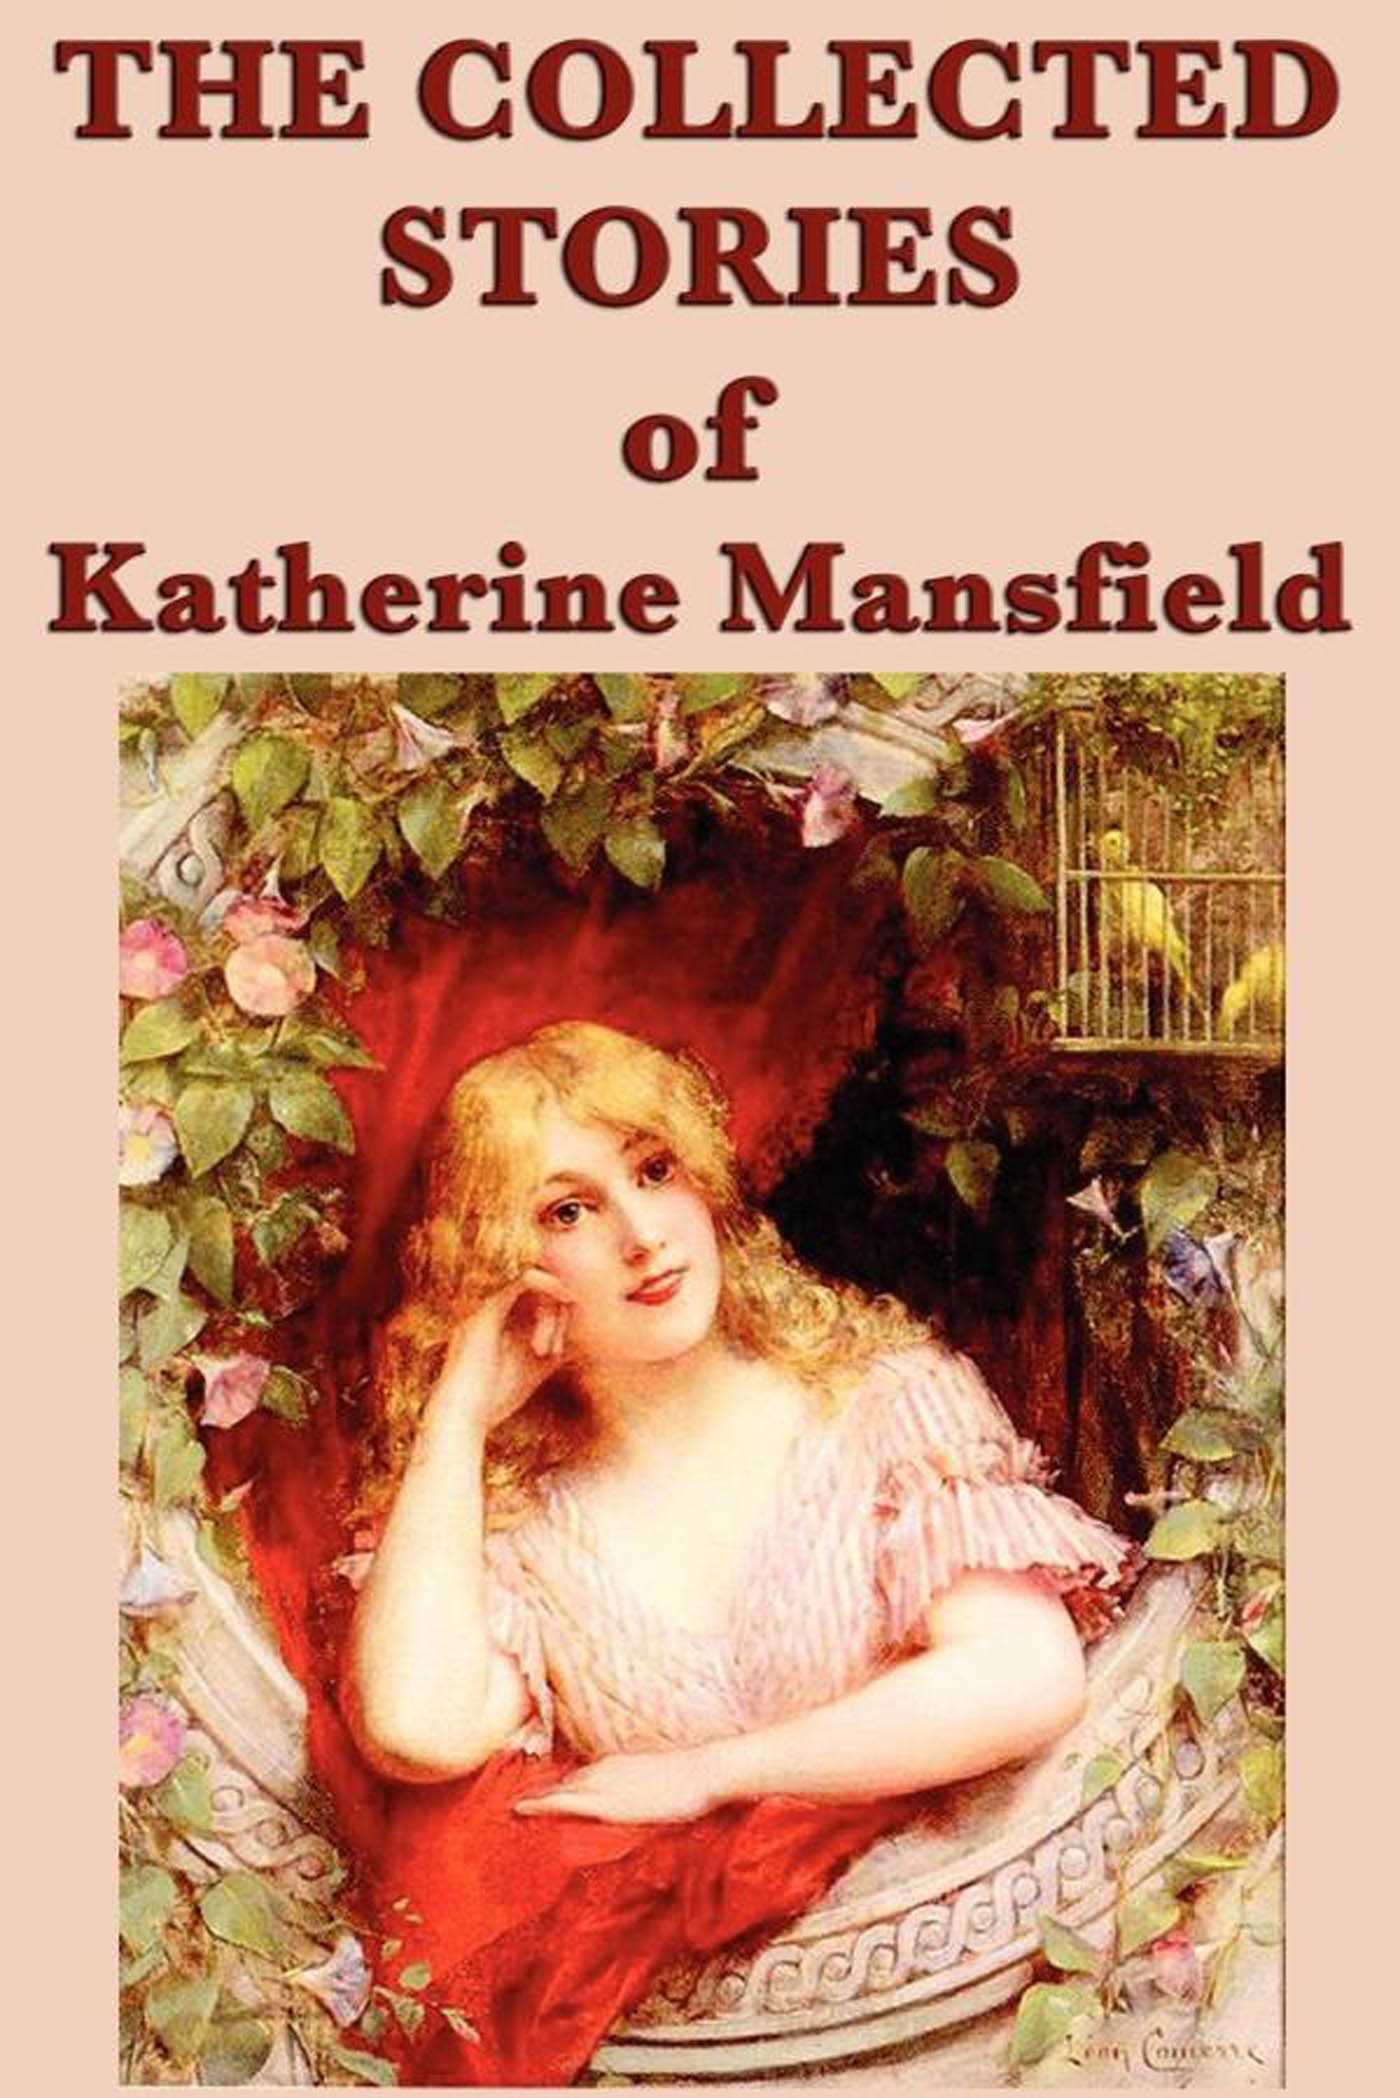 the-collected-stories-of-katherine-mansfield-9781625583765_hr.jpg